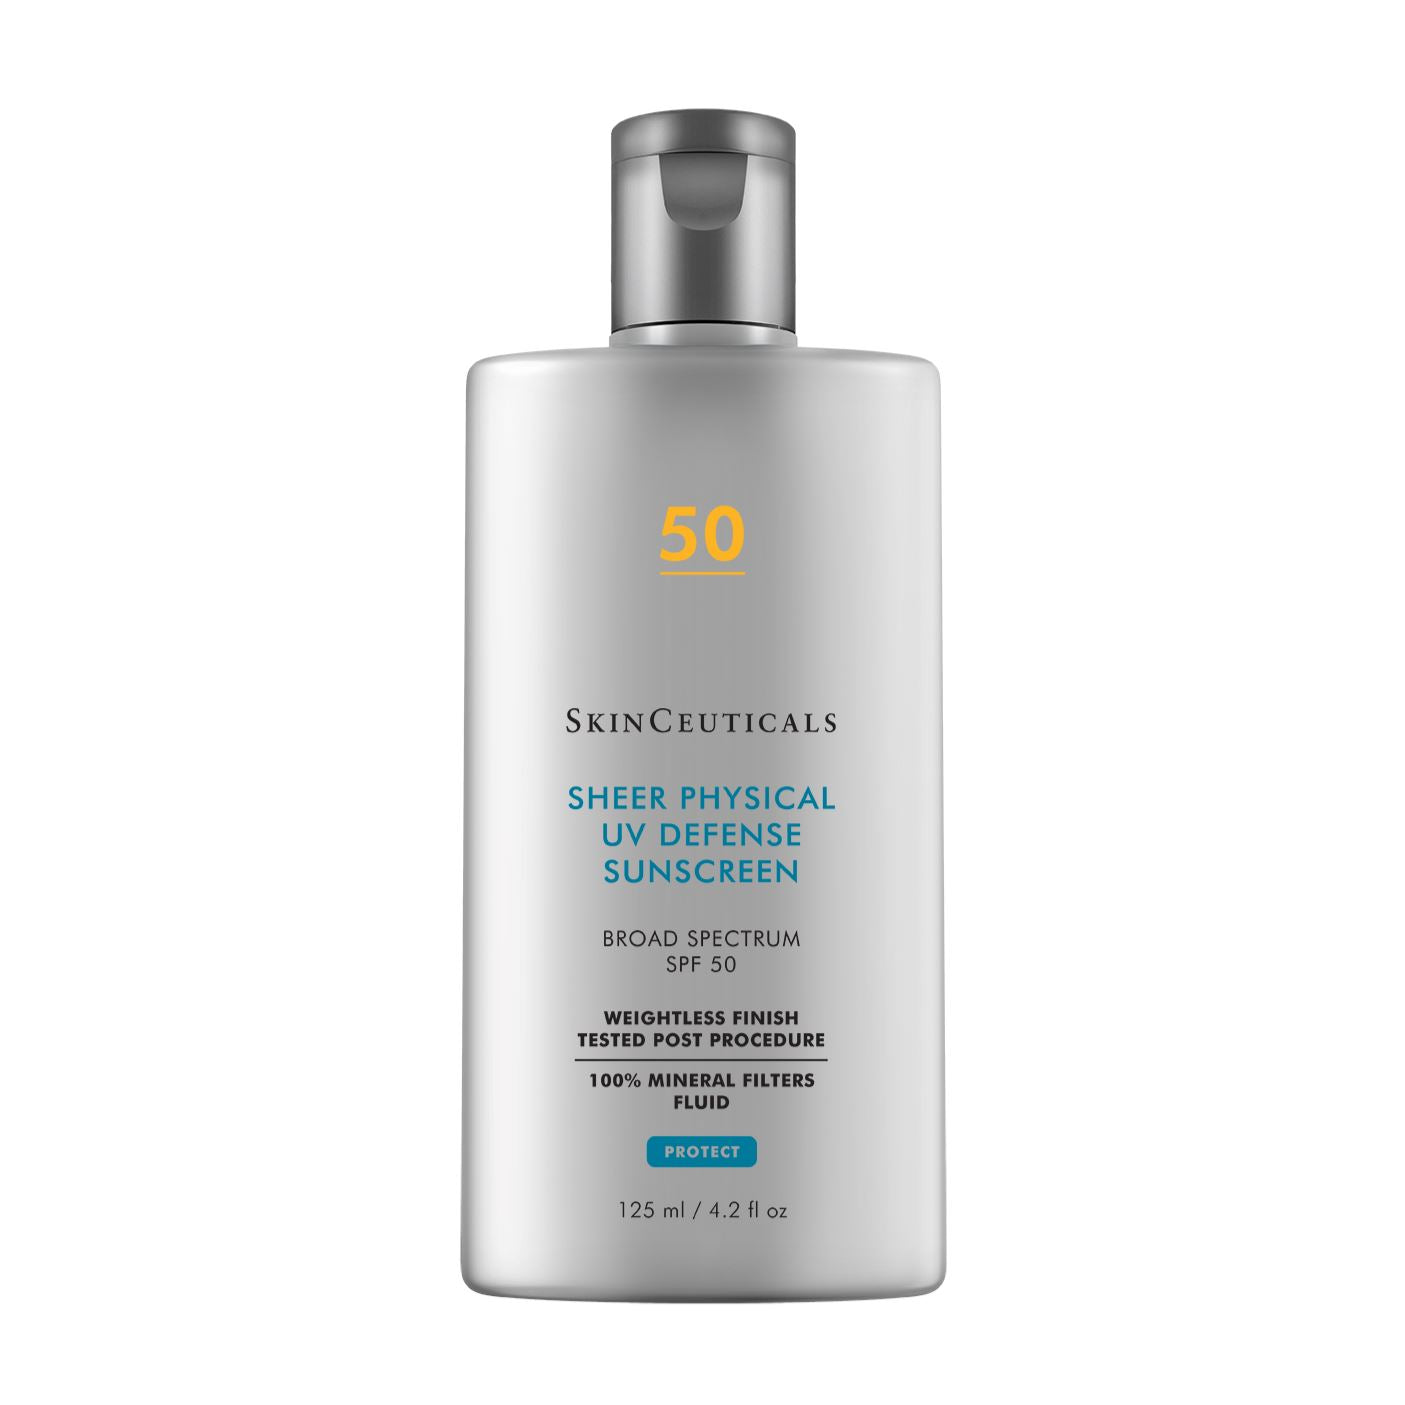 SkinCeuticals Sheer Physical UV Defense SPF 50 SkinCeuticals 4.2 fl. oz. Shop at Exclusive Beauty Club